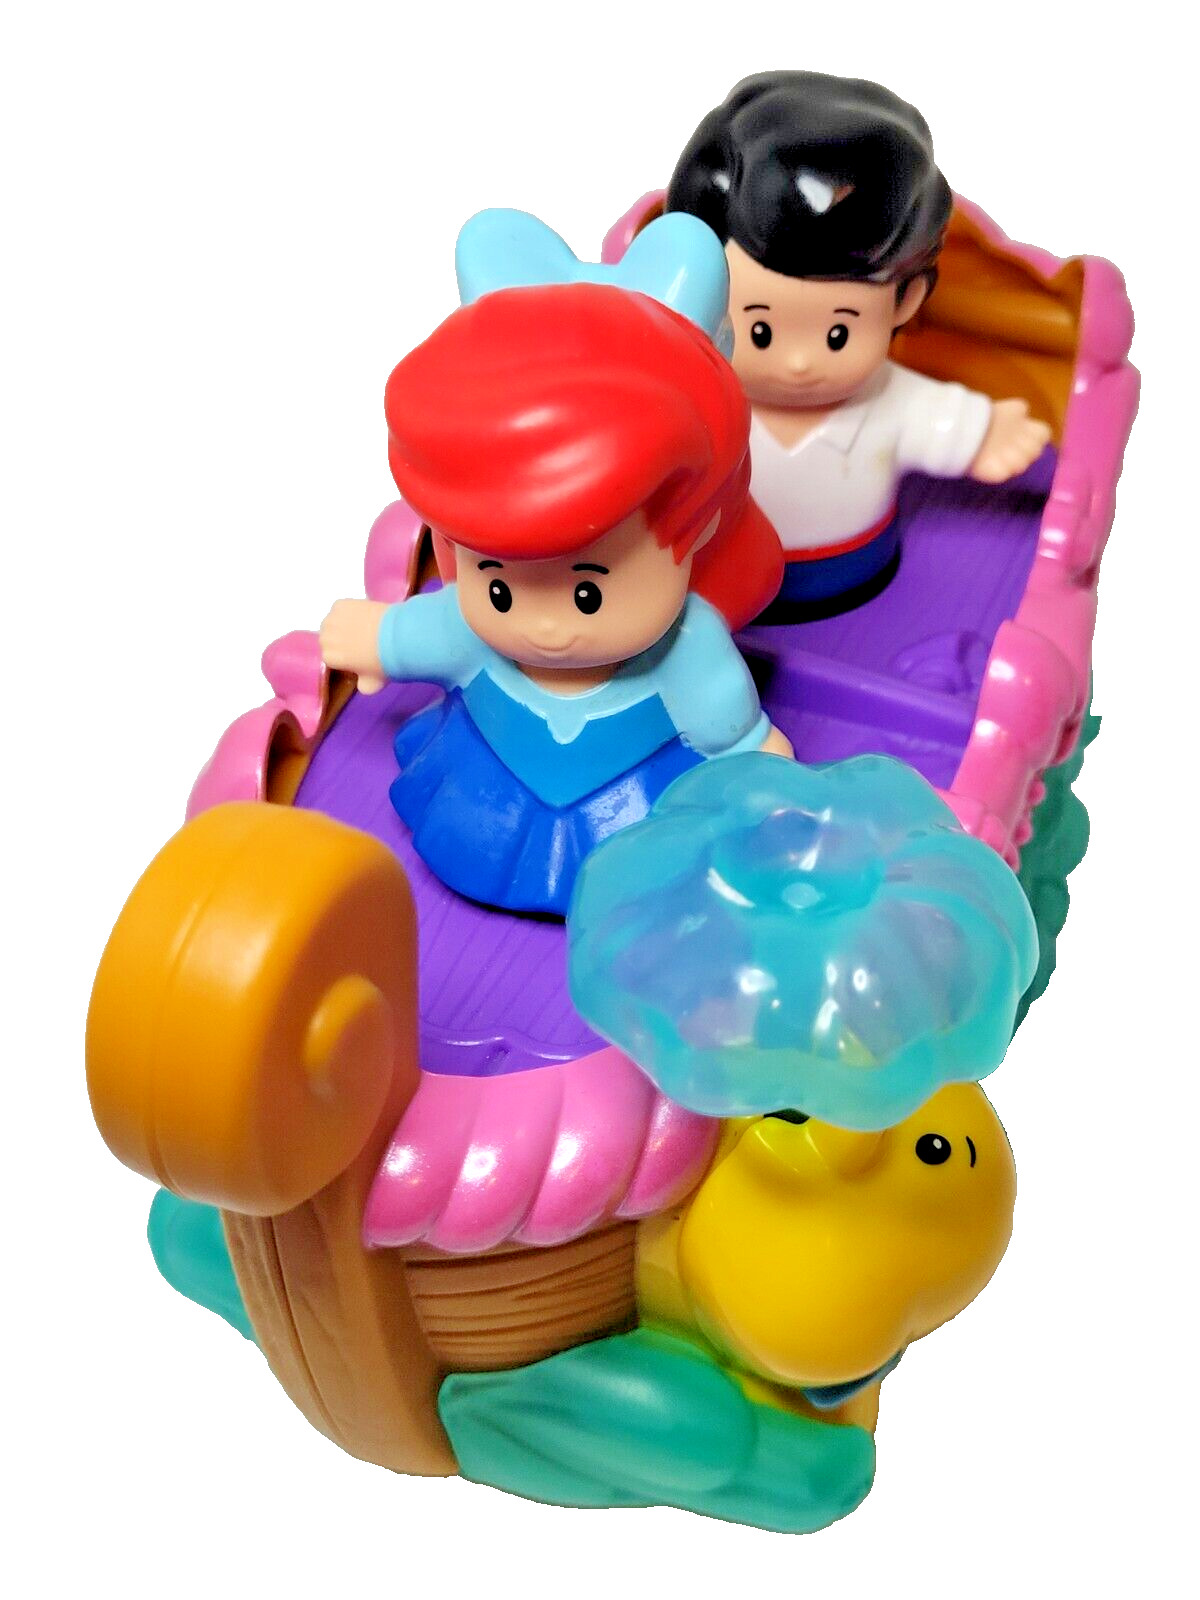 RARE Fisher Price Little People ARIEL'S BOAT RIDE w/Flounder Prince Eric